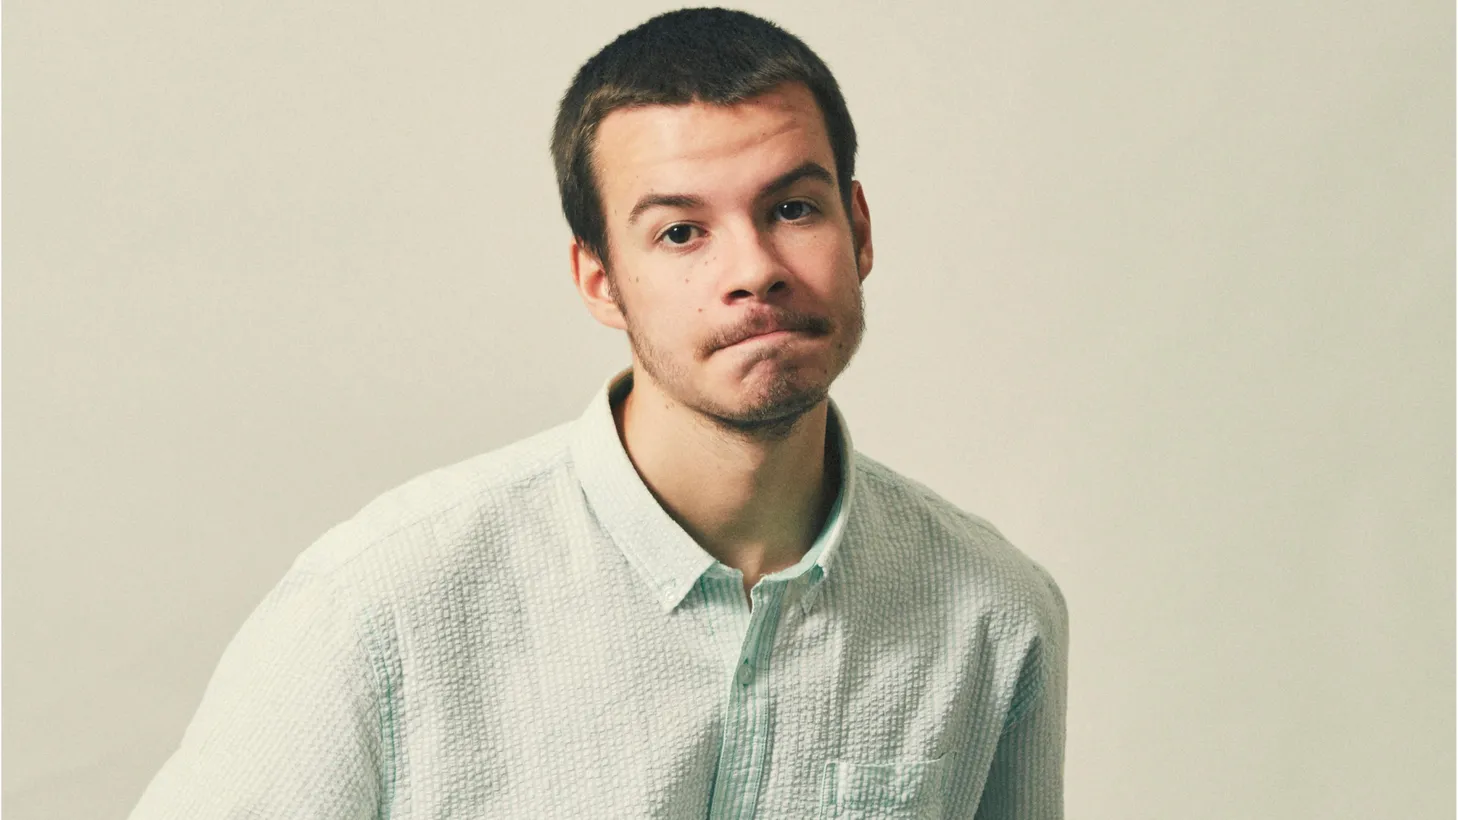 Rex Orange County is not from Southern California. In fact, it’s the moniker of 20-year-old UK musician Alex O'Connor, whose star has risen swiftly on the strength of the insanely catchy single Loving Is Easy.